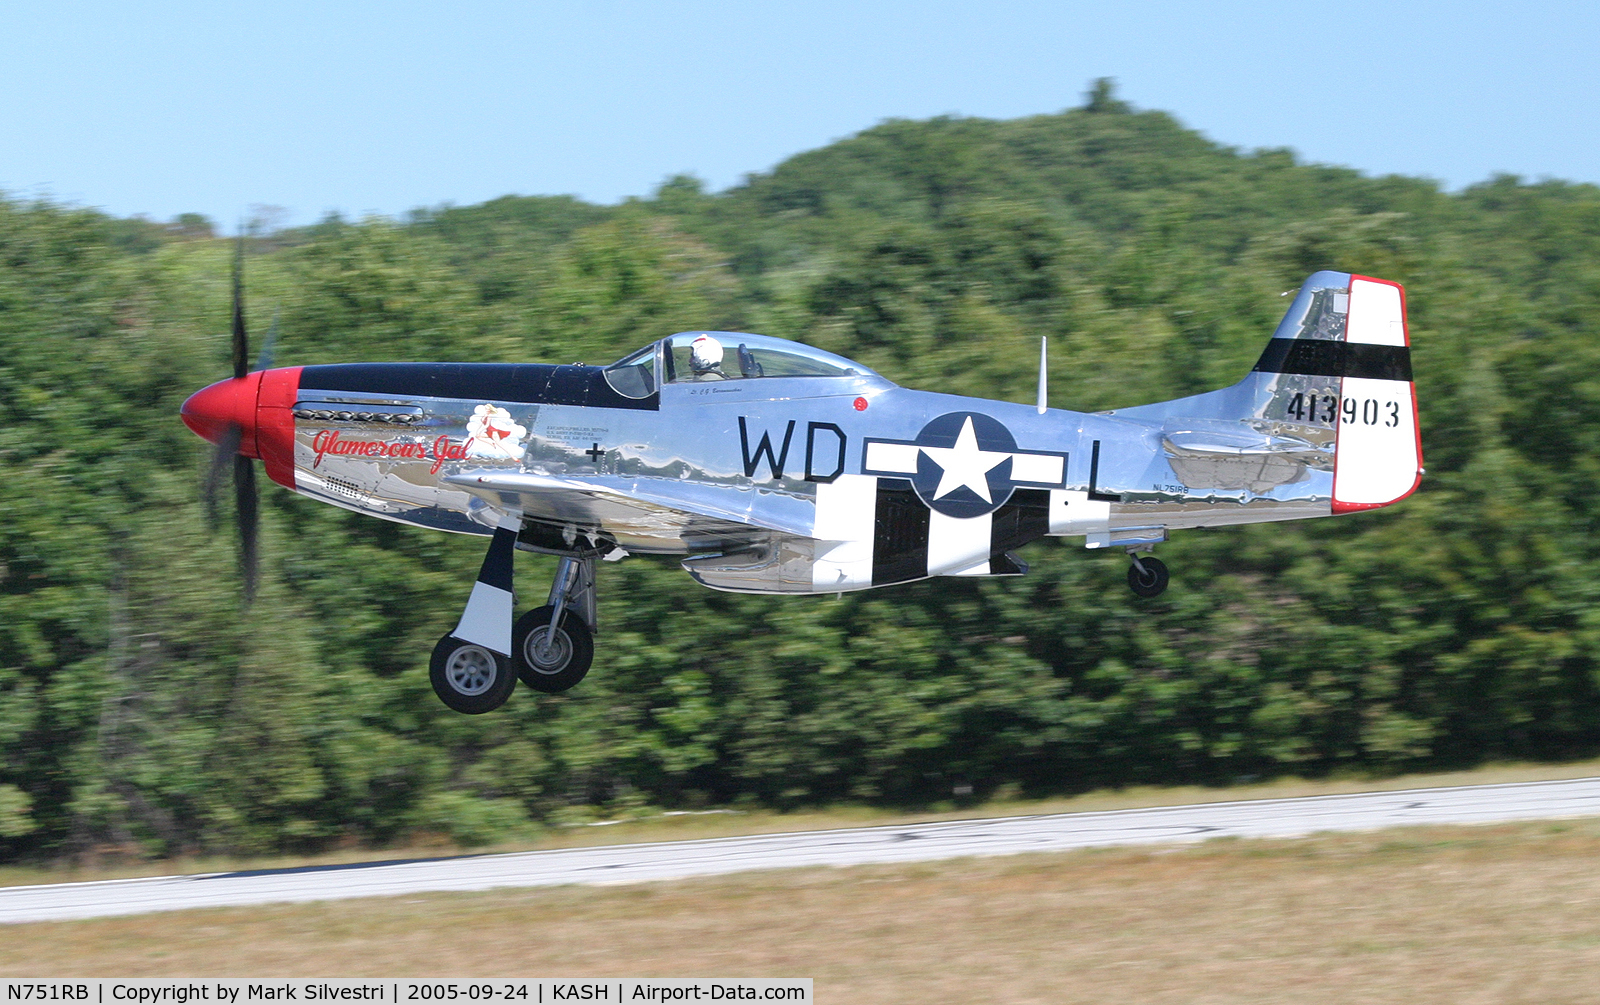 N751RB, 1944 North American P-51D Mustang C/N 44-13903JP, Glamerous Girl on Take off from Daniel Webster Airshow 2005